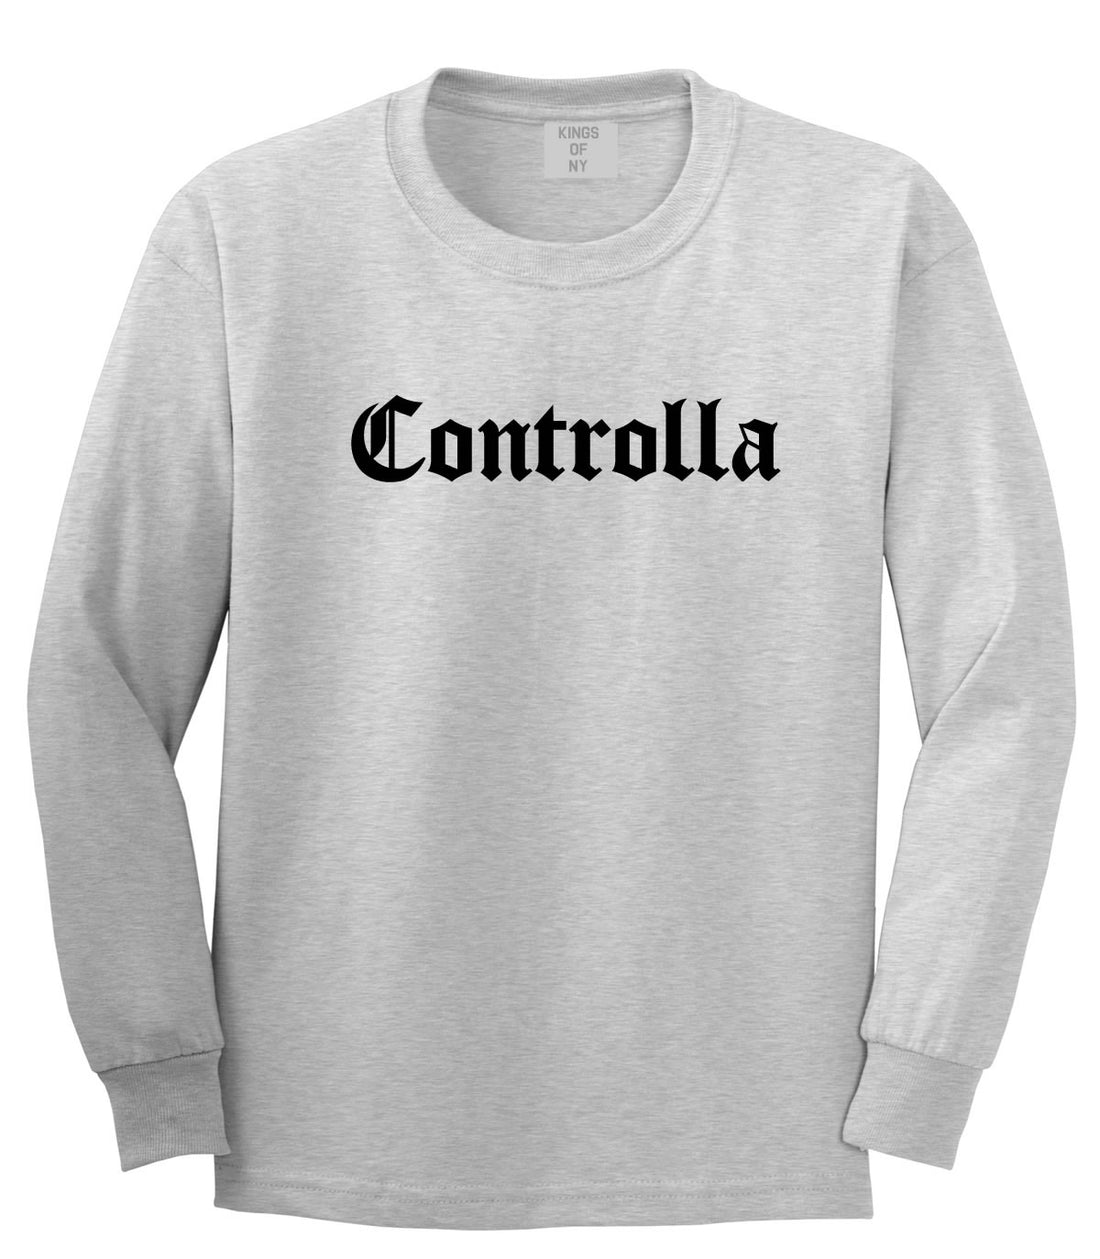 Controlla Long Sleeve T-Shirt By Kings Of NY